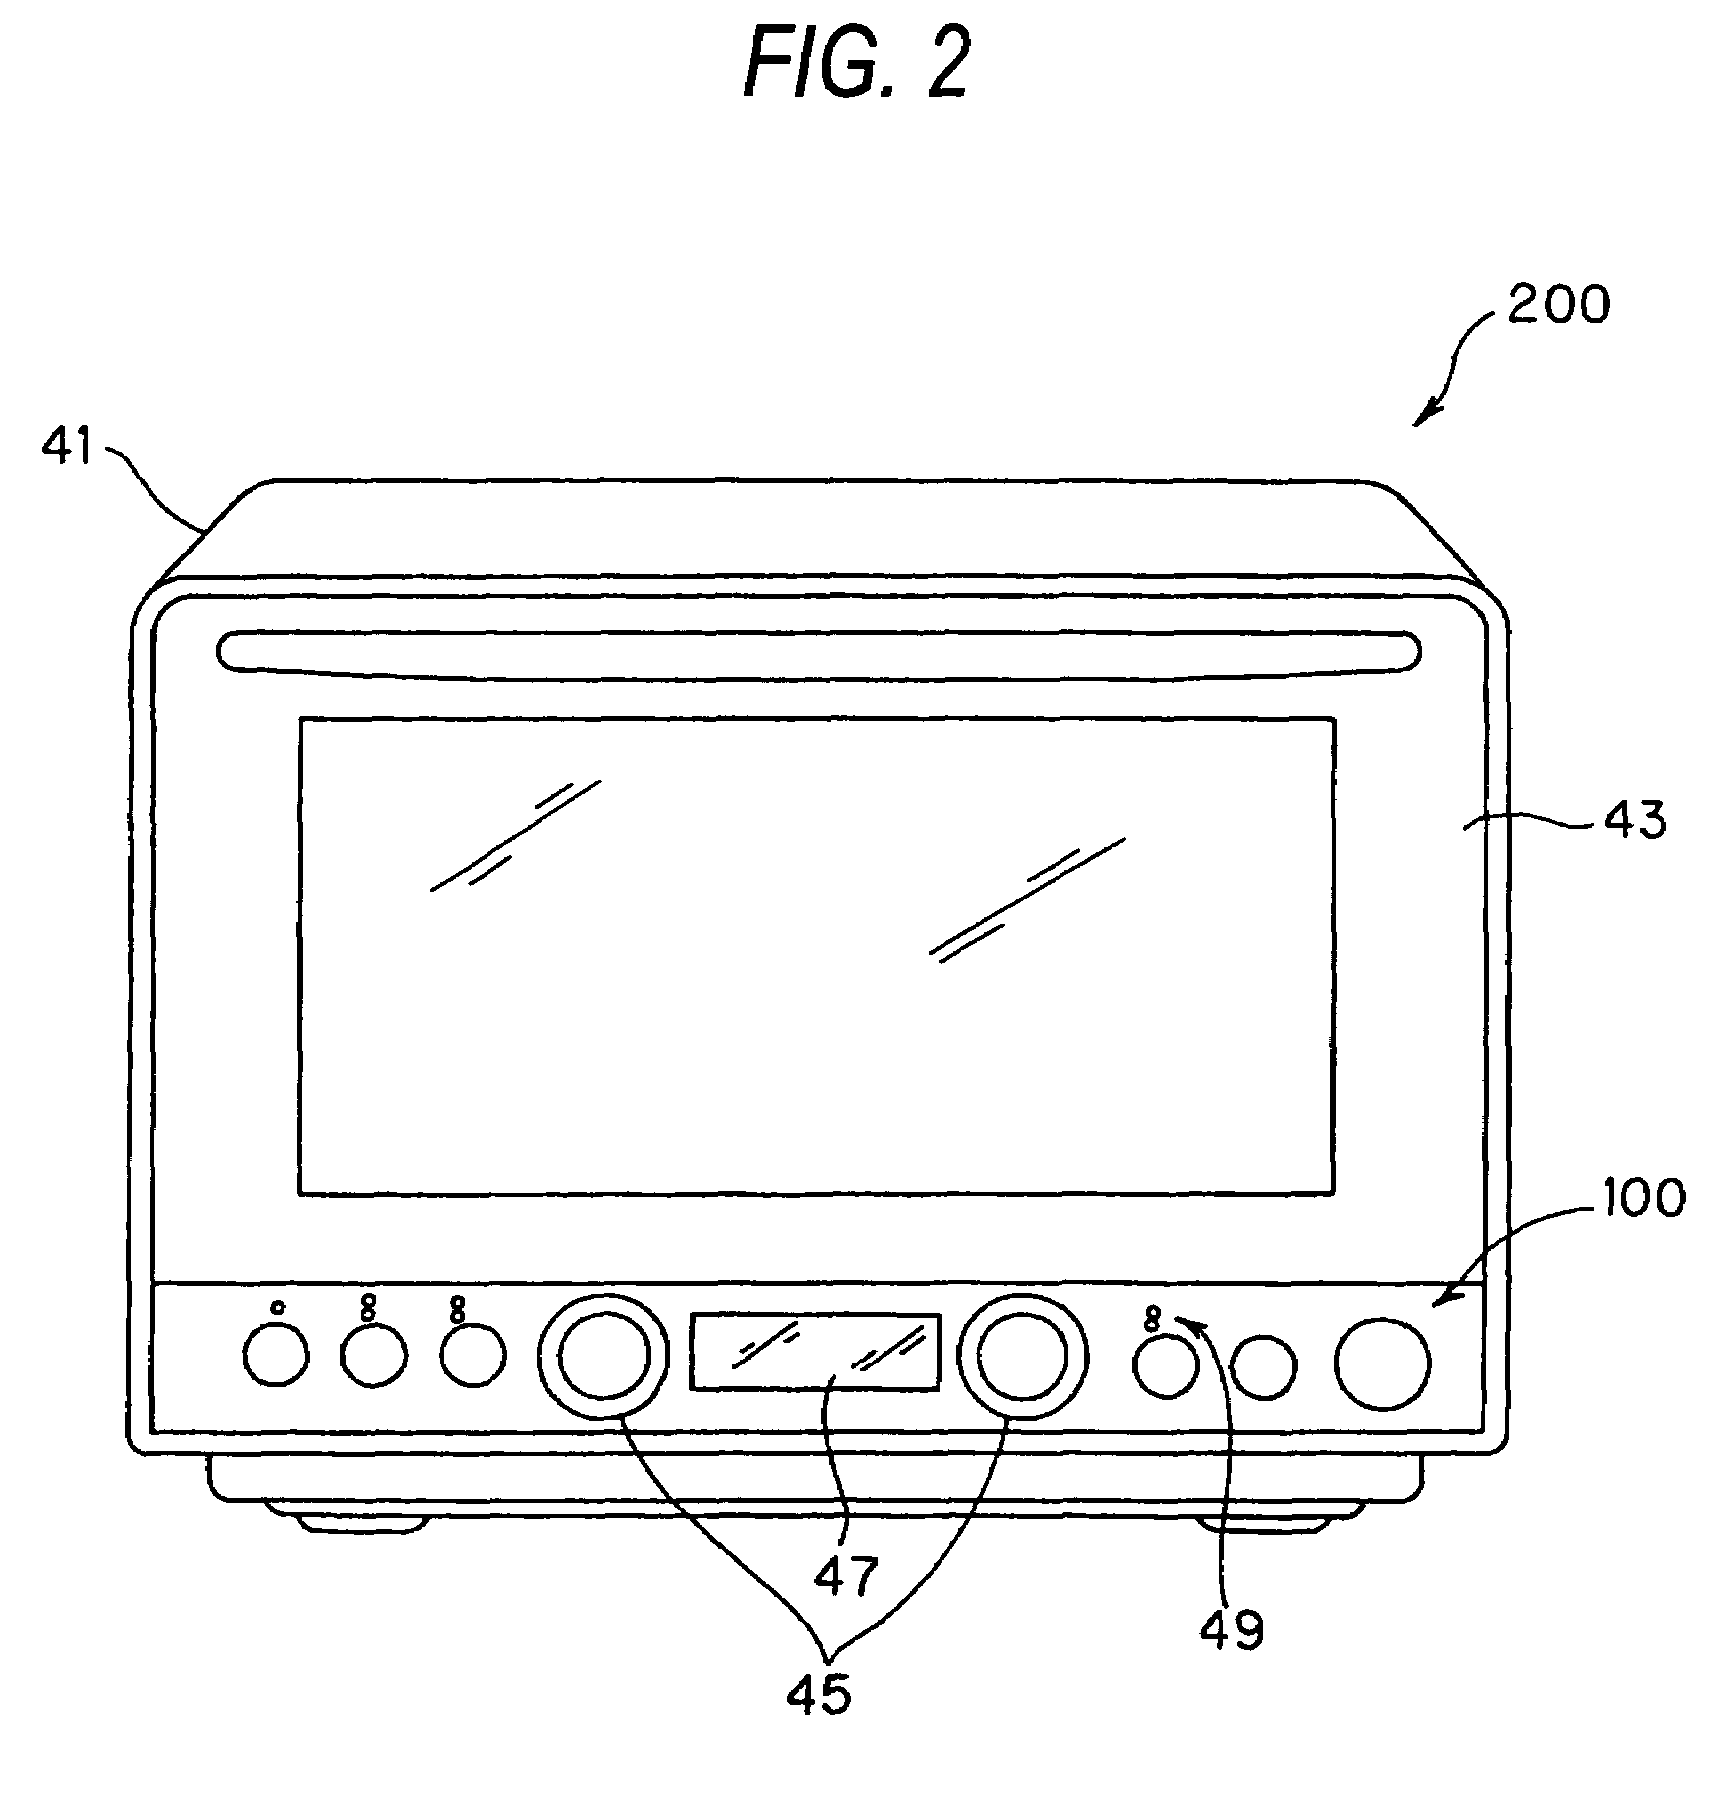 Display panel, control display panel and method for integrally molding insert material